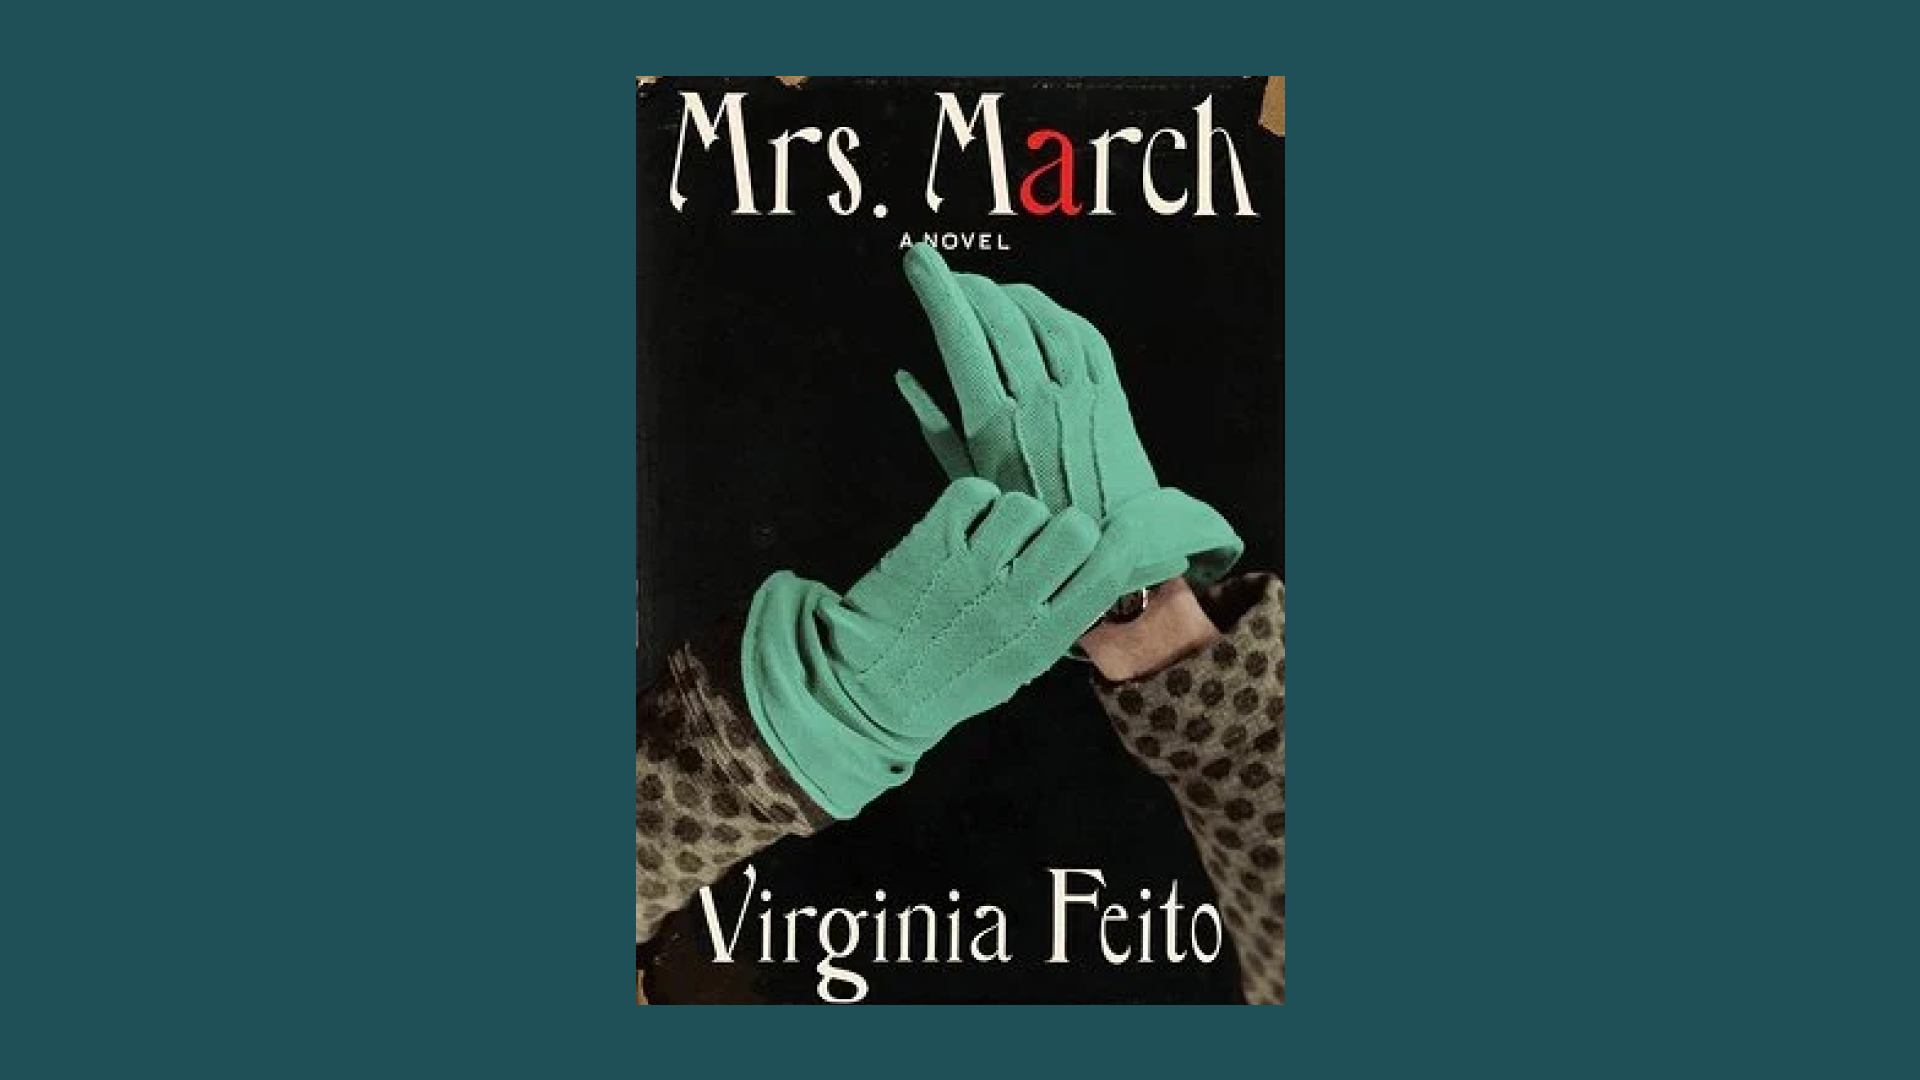 “Mrs. March” by Virginia Feito